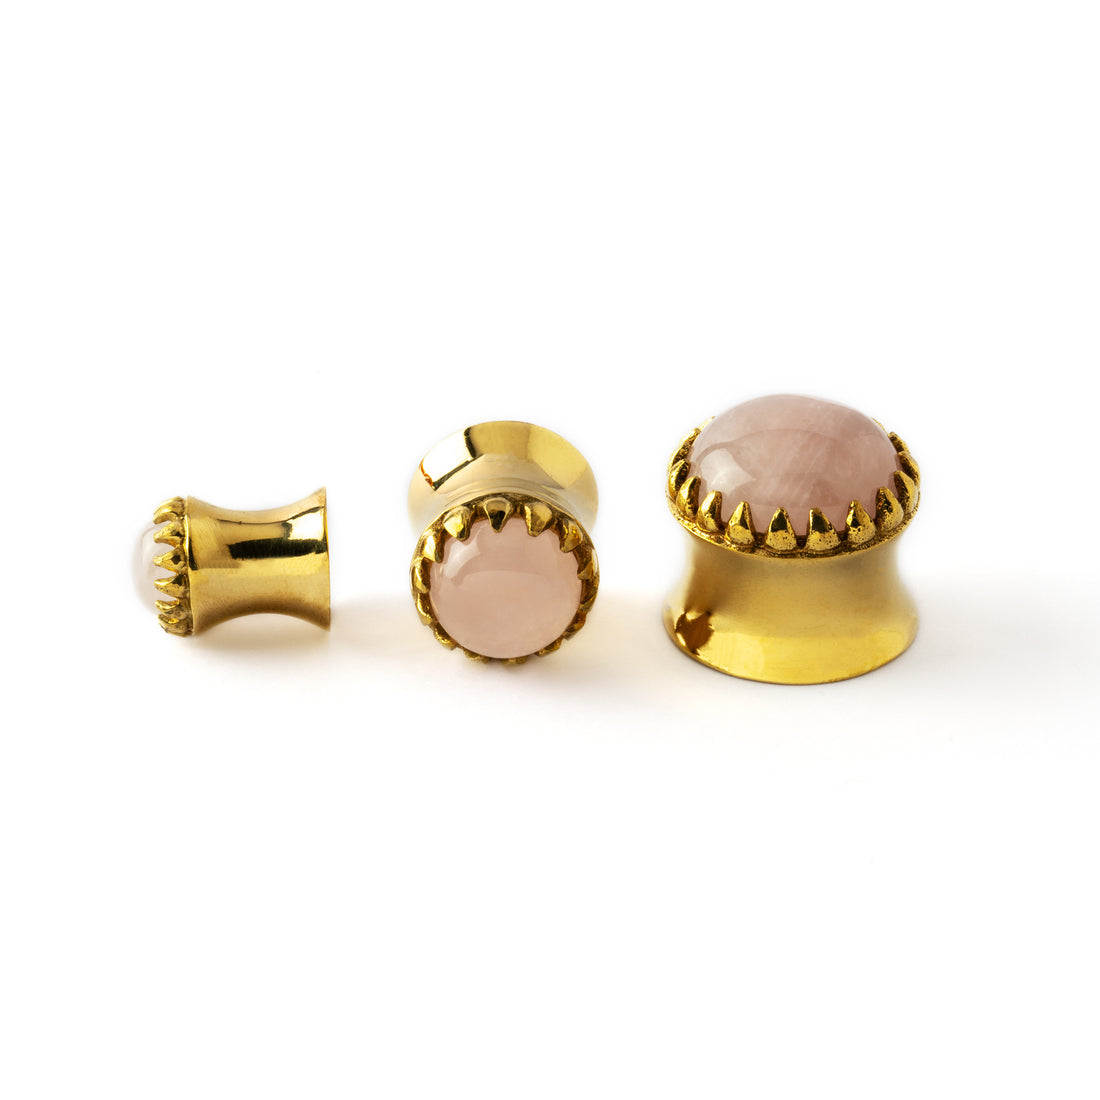 golden ear plug crown shaped with centred rose quartz in variety of sizes